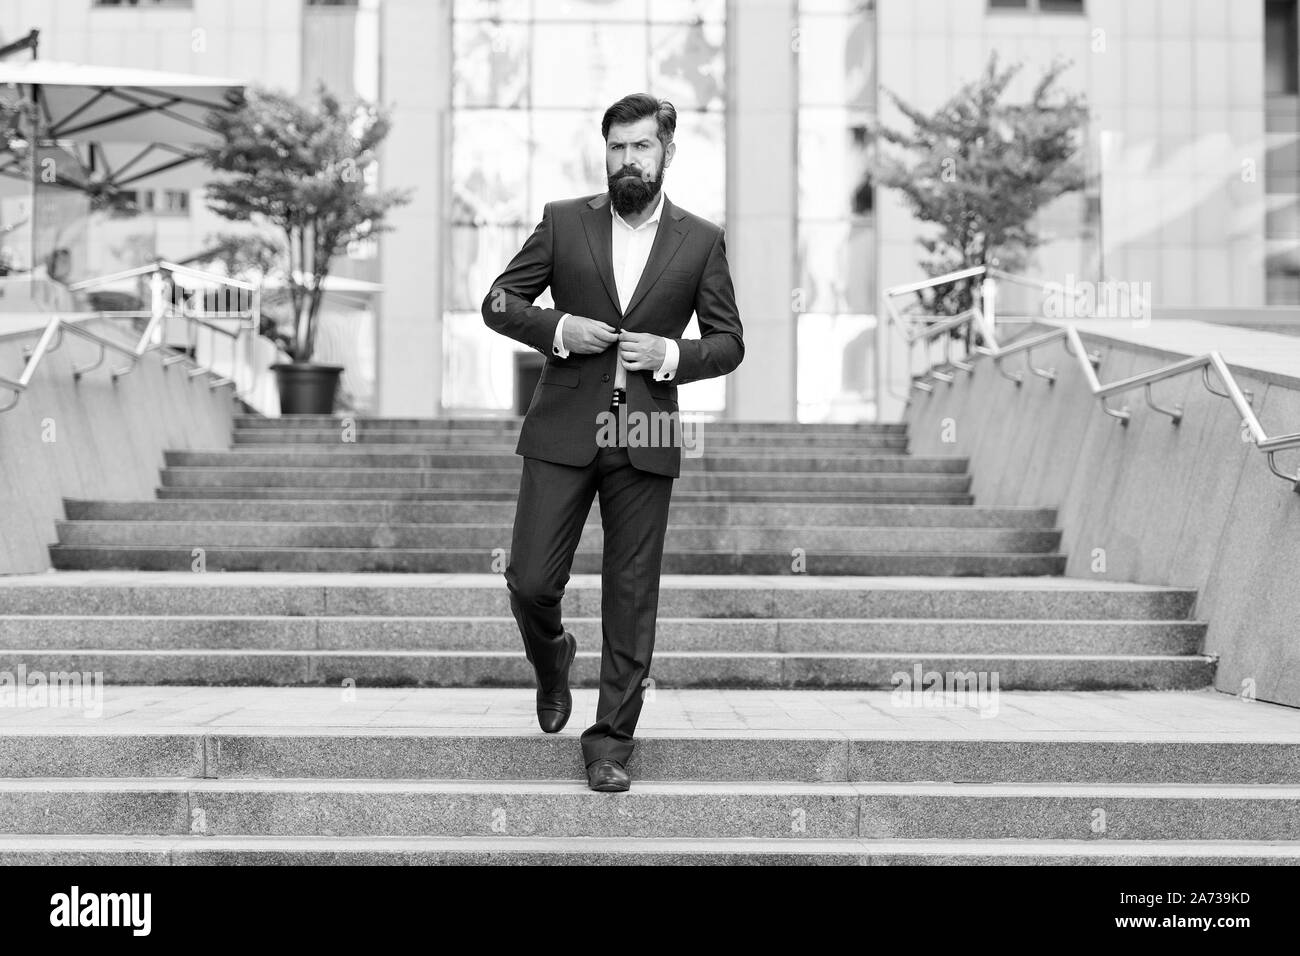 Mafia boss. auditor man in fashion suit. modern life. motivated  entrepreneur. formal male fashion. Classic style aesthetic. confident boss  businessman auditor. business success. business man boss Stock Photo - Alamy